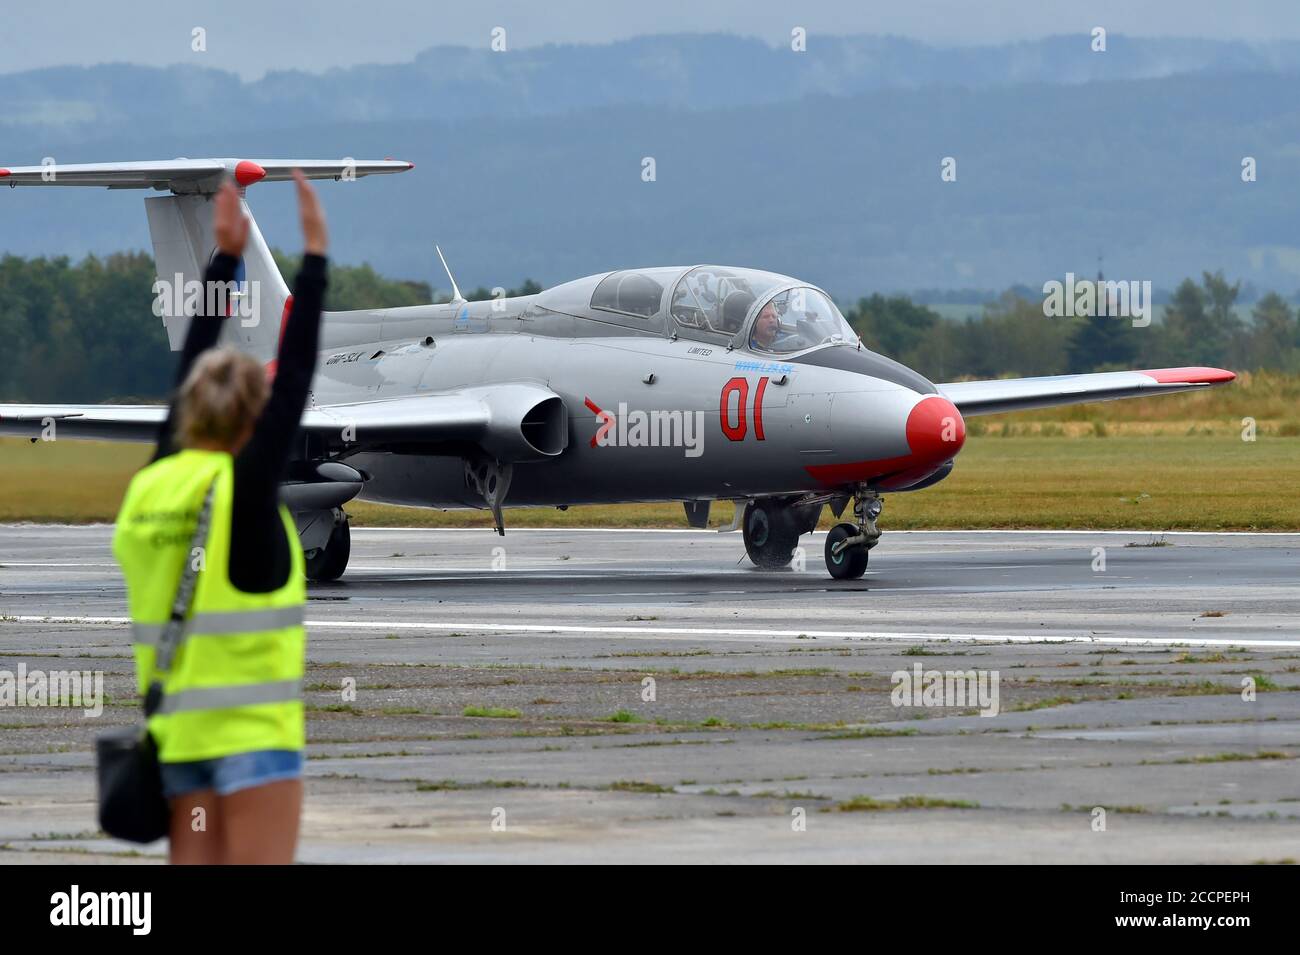 Aero L-29 Delfin (Dolphin) is seen during the two-day airshow in Cheb, Czech Republic, on August 22, 2020. (CTK Photo/Slavomir Kubes) Stock Photo